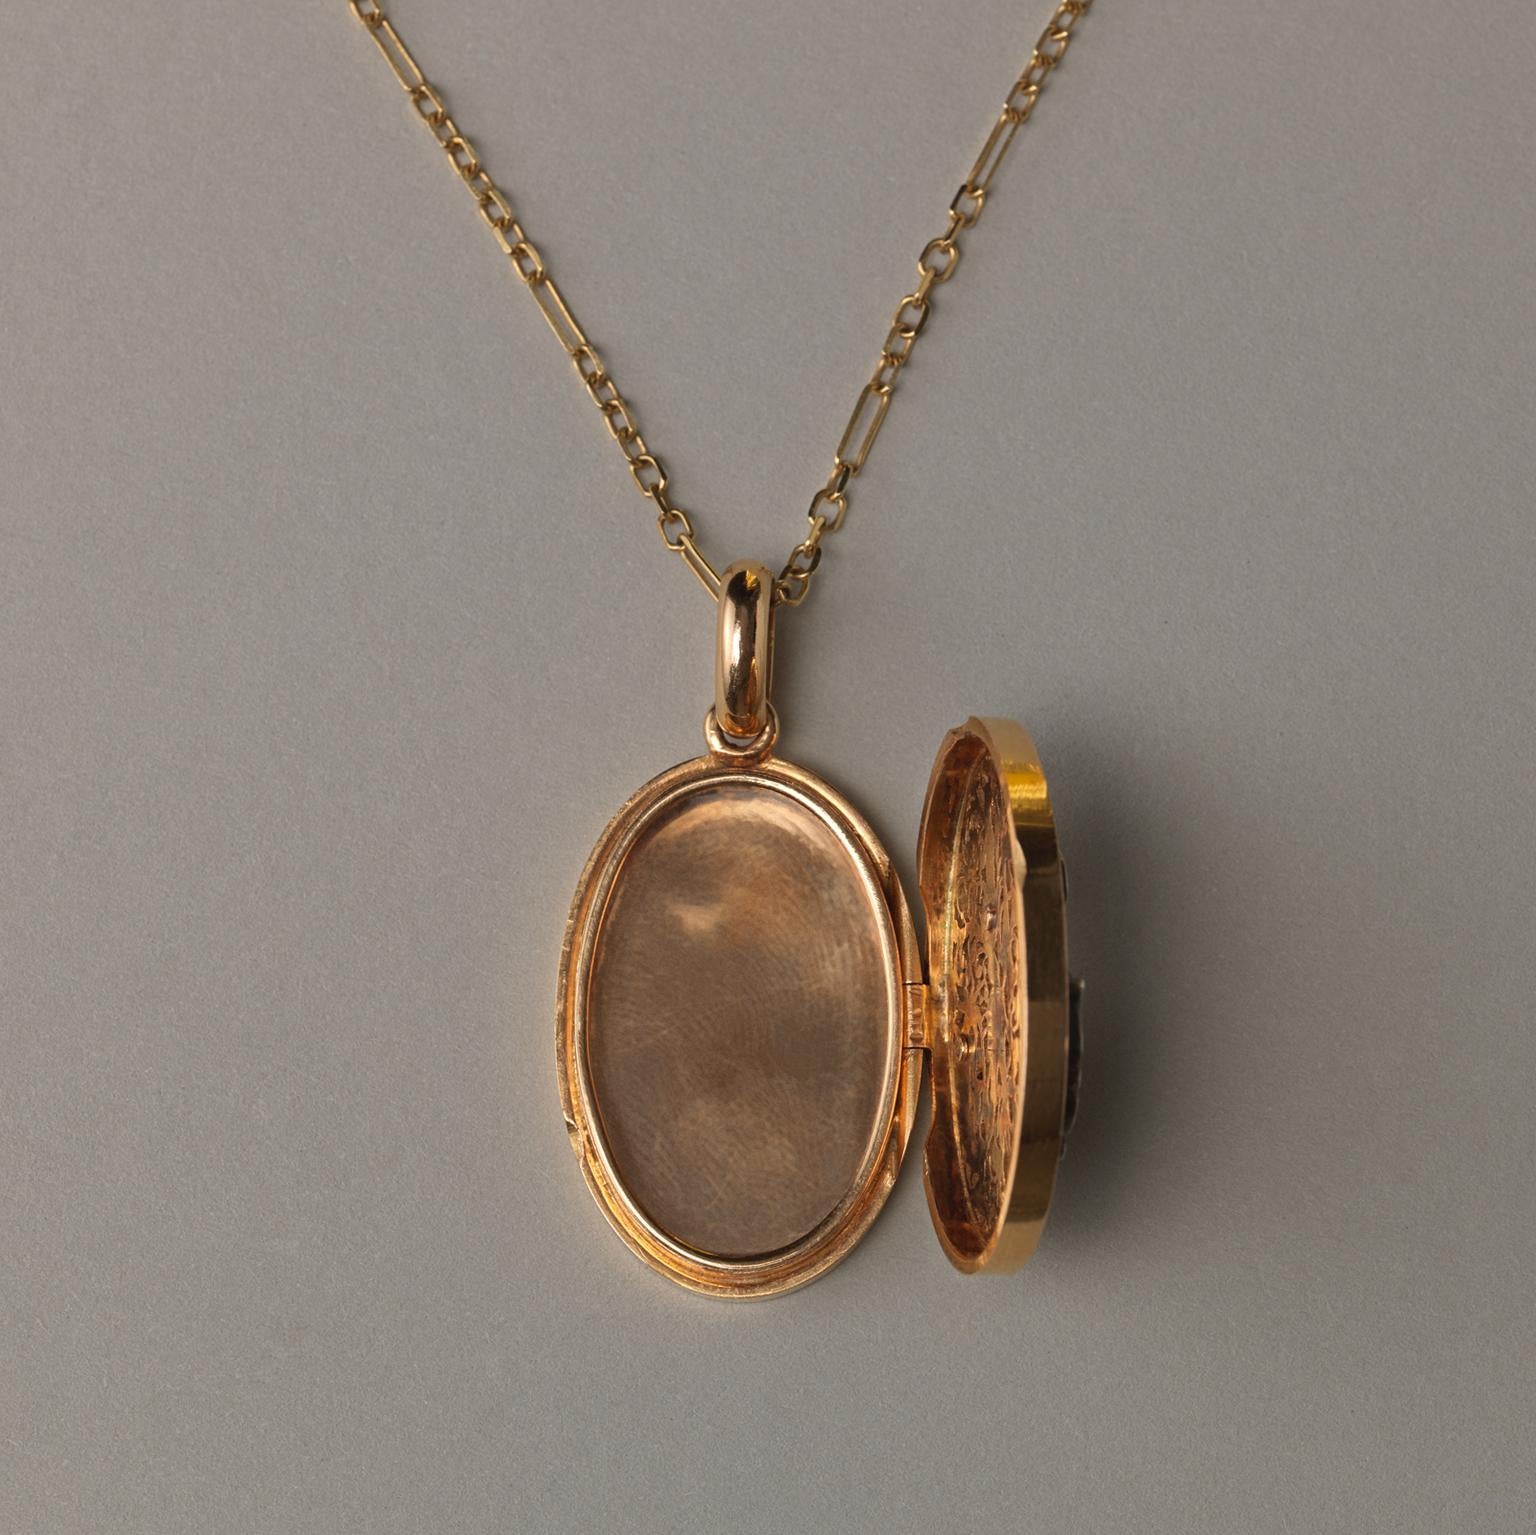 An 18 carat gold oval locket open worked with scrolls with an ornamental initial A set with rose cut diamonds and one locket compartment, the back is engraved with the initials AI or AJ, French 19th century.

weight: 19.84 grams
dimensions: 4.5 x